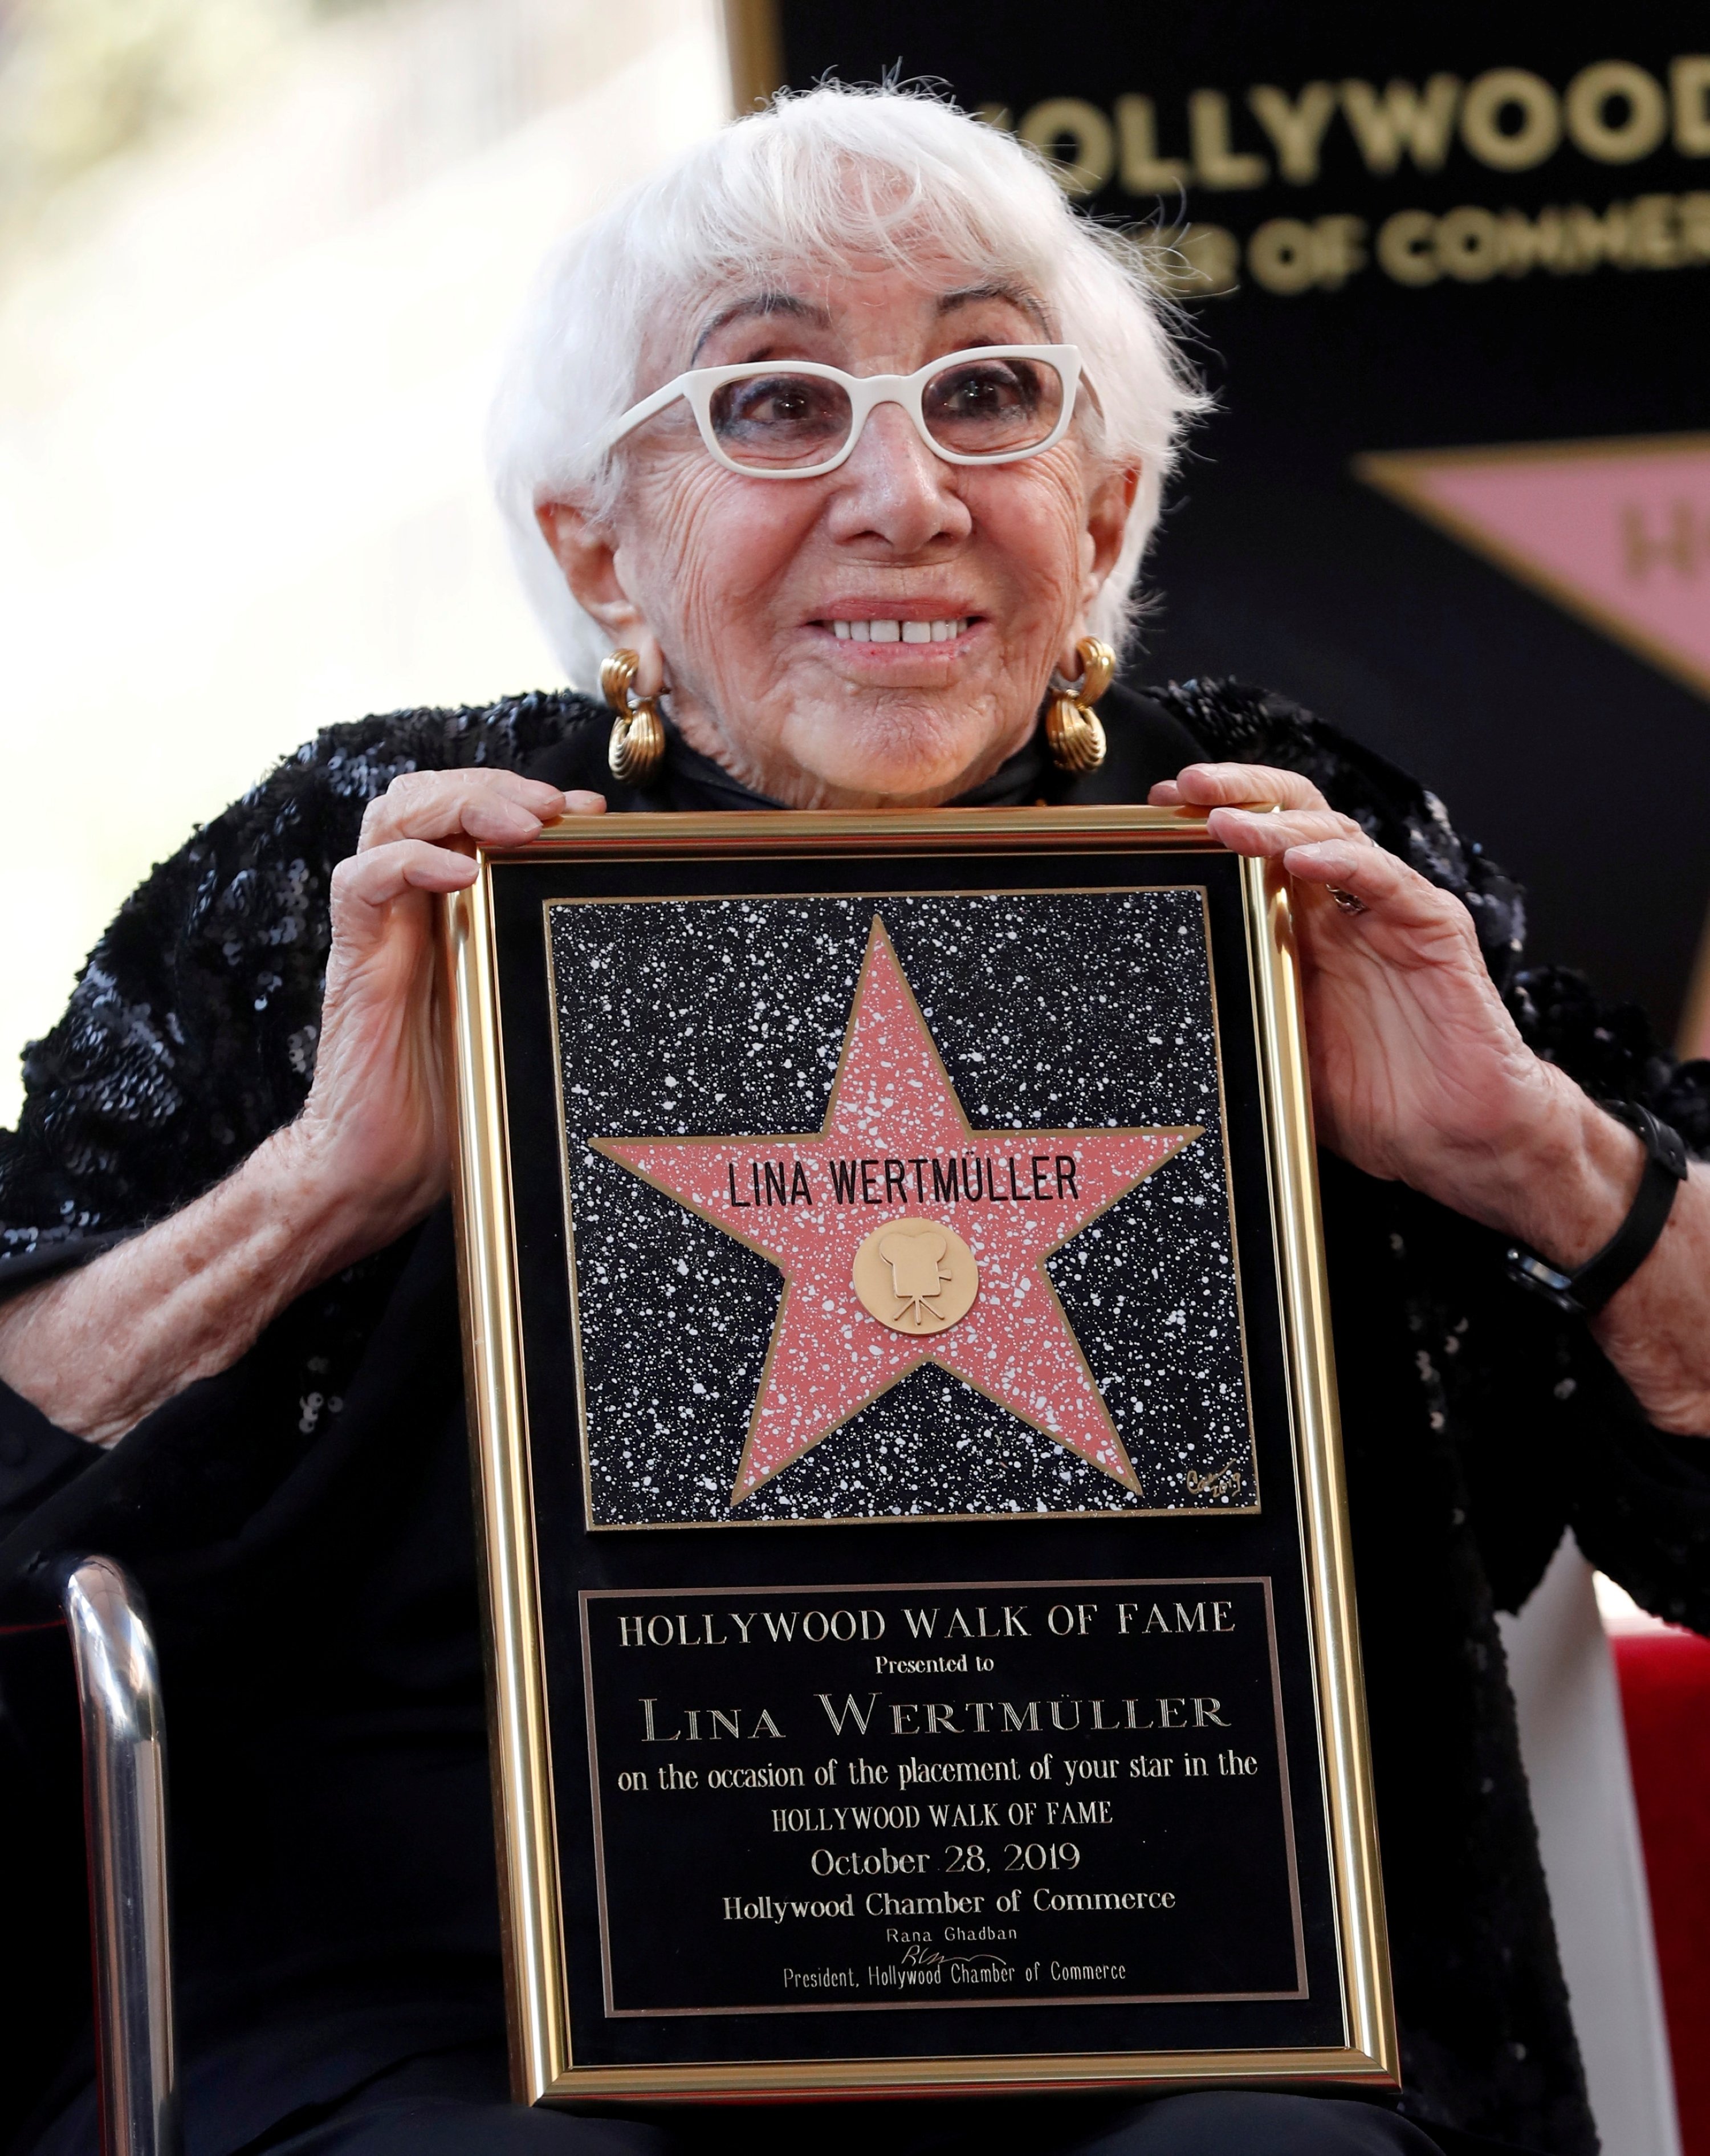 Italian film director Lina Wertmuller poses after unveiling her star on the Hollywood Walk of Fame in Los Angeles, California, U.S., Oct. 28, 2019. (REUTERS)